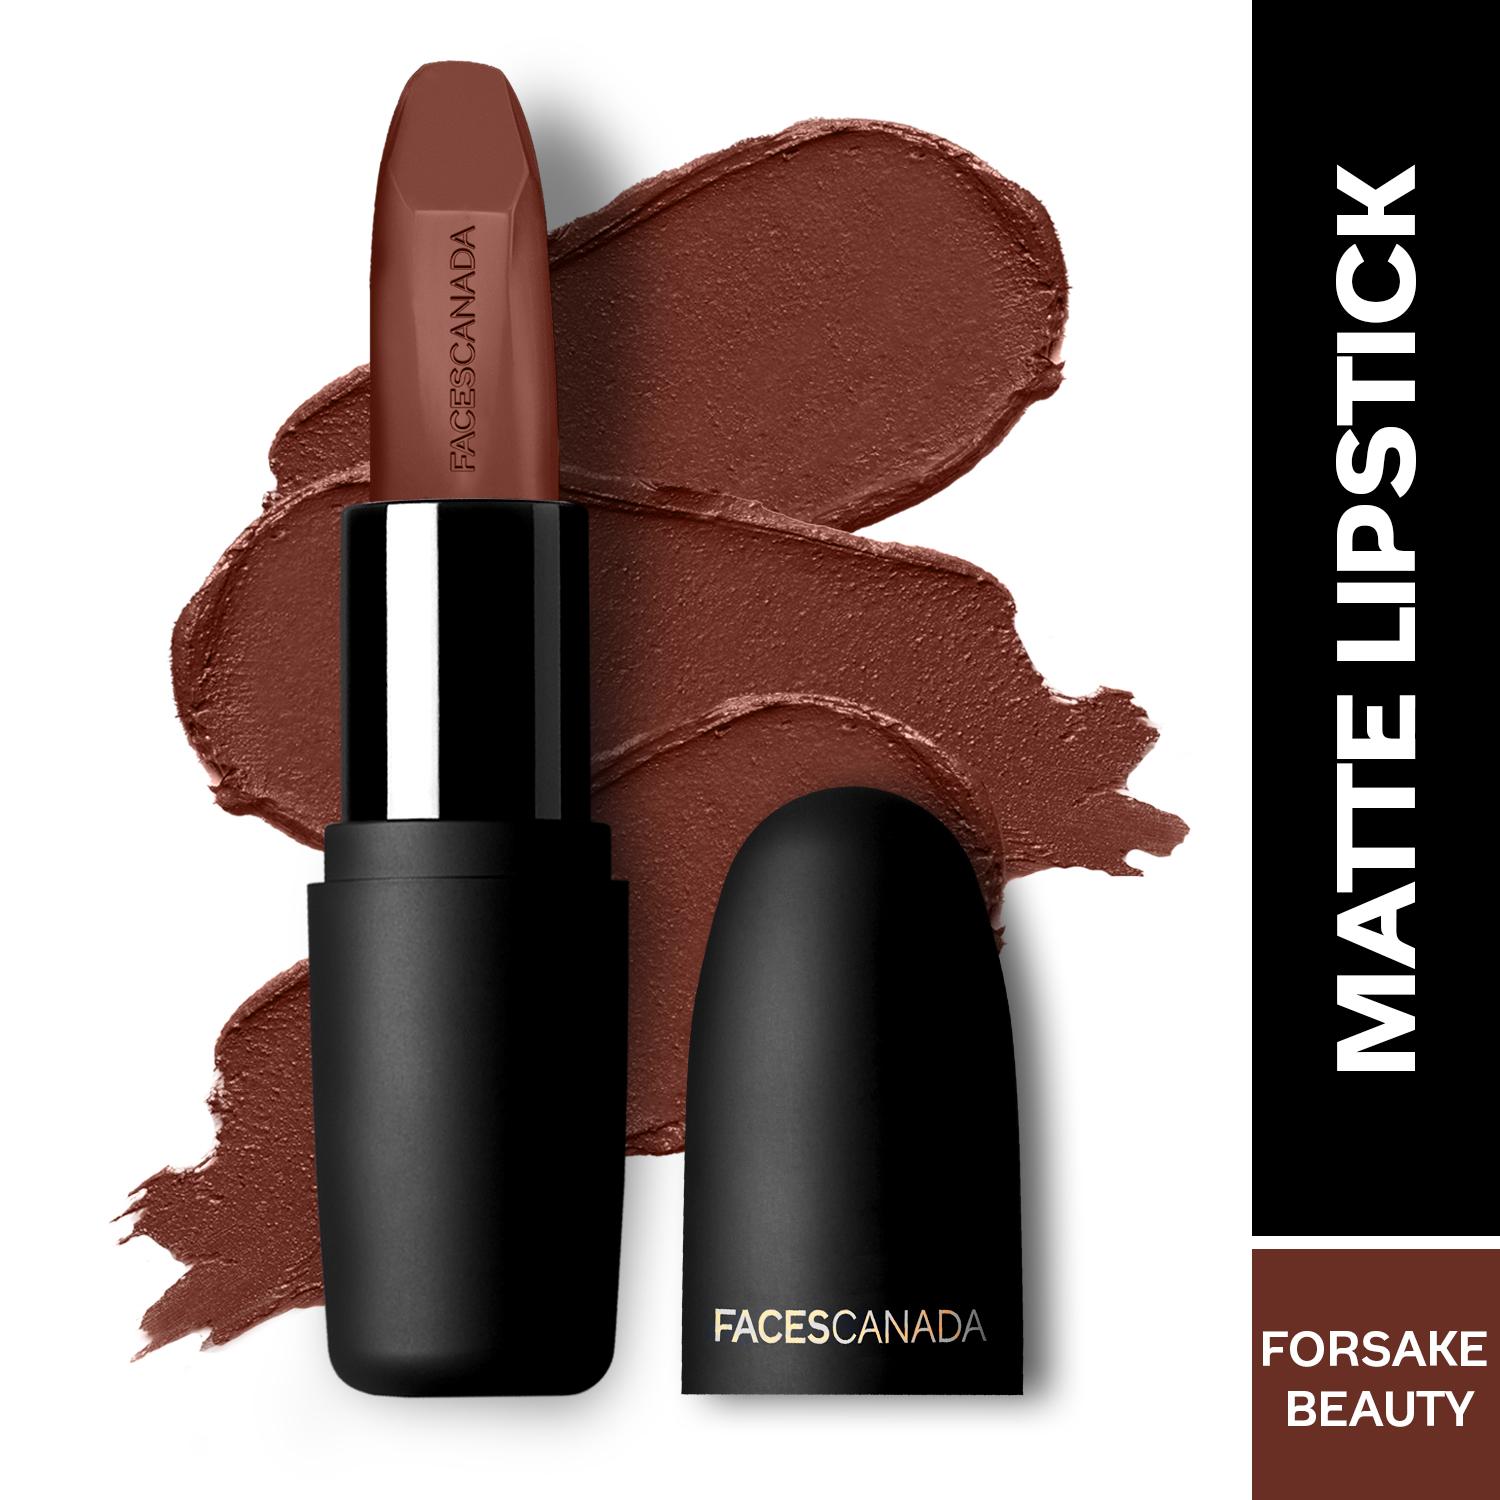 Faces Canada | Faces Canada Weightless Matte Lipstick, Pigmented and Hydrated Lips - Forsake Beauty 01 (4.5 g)